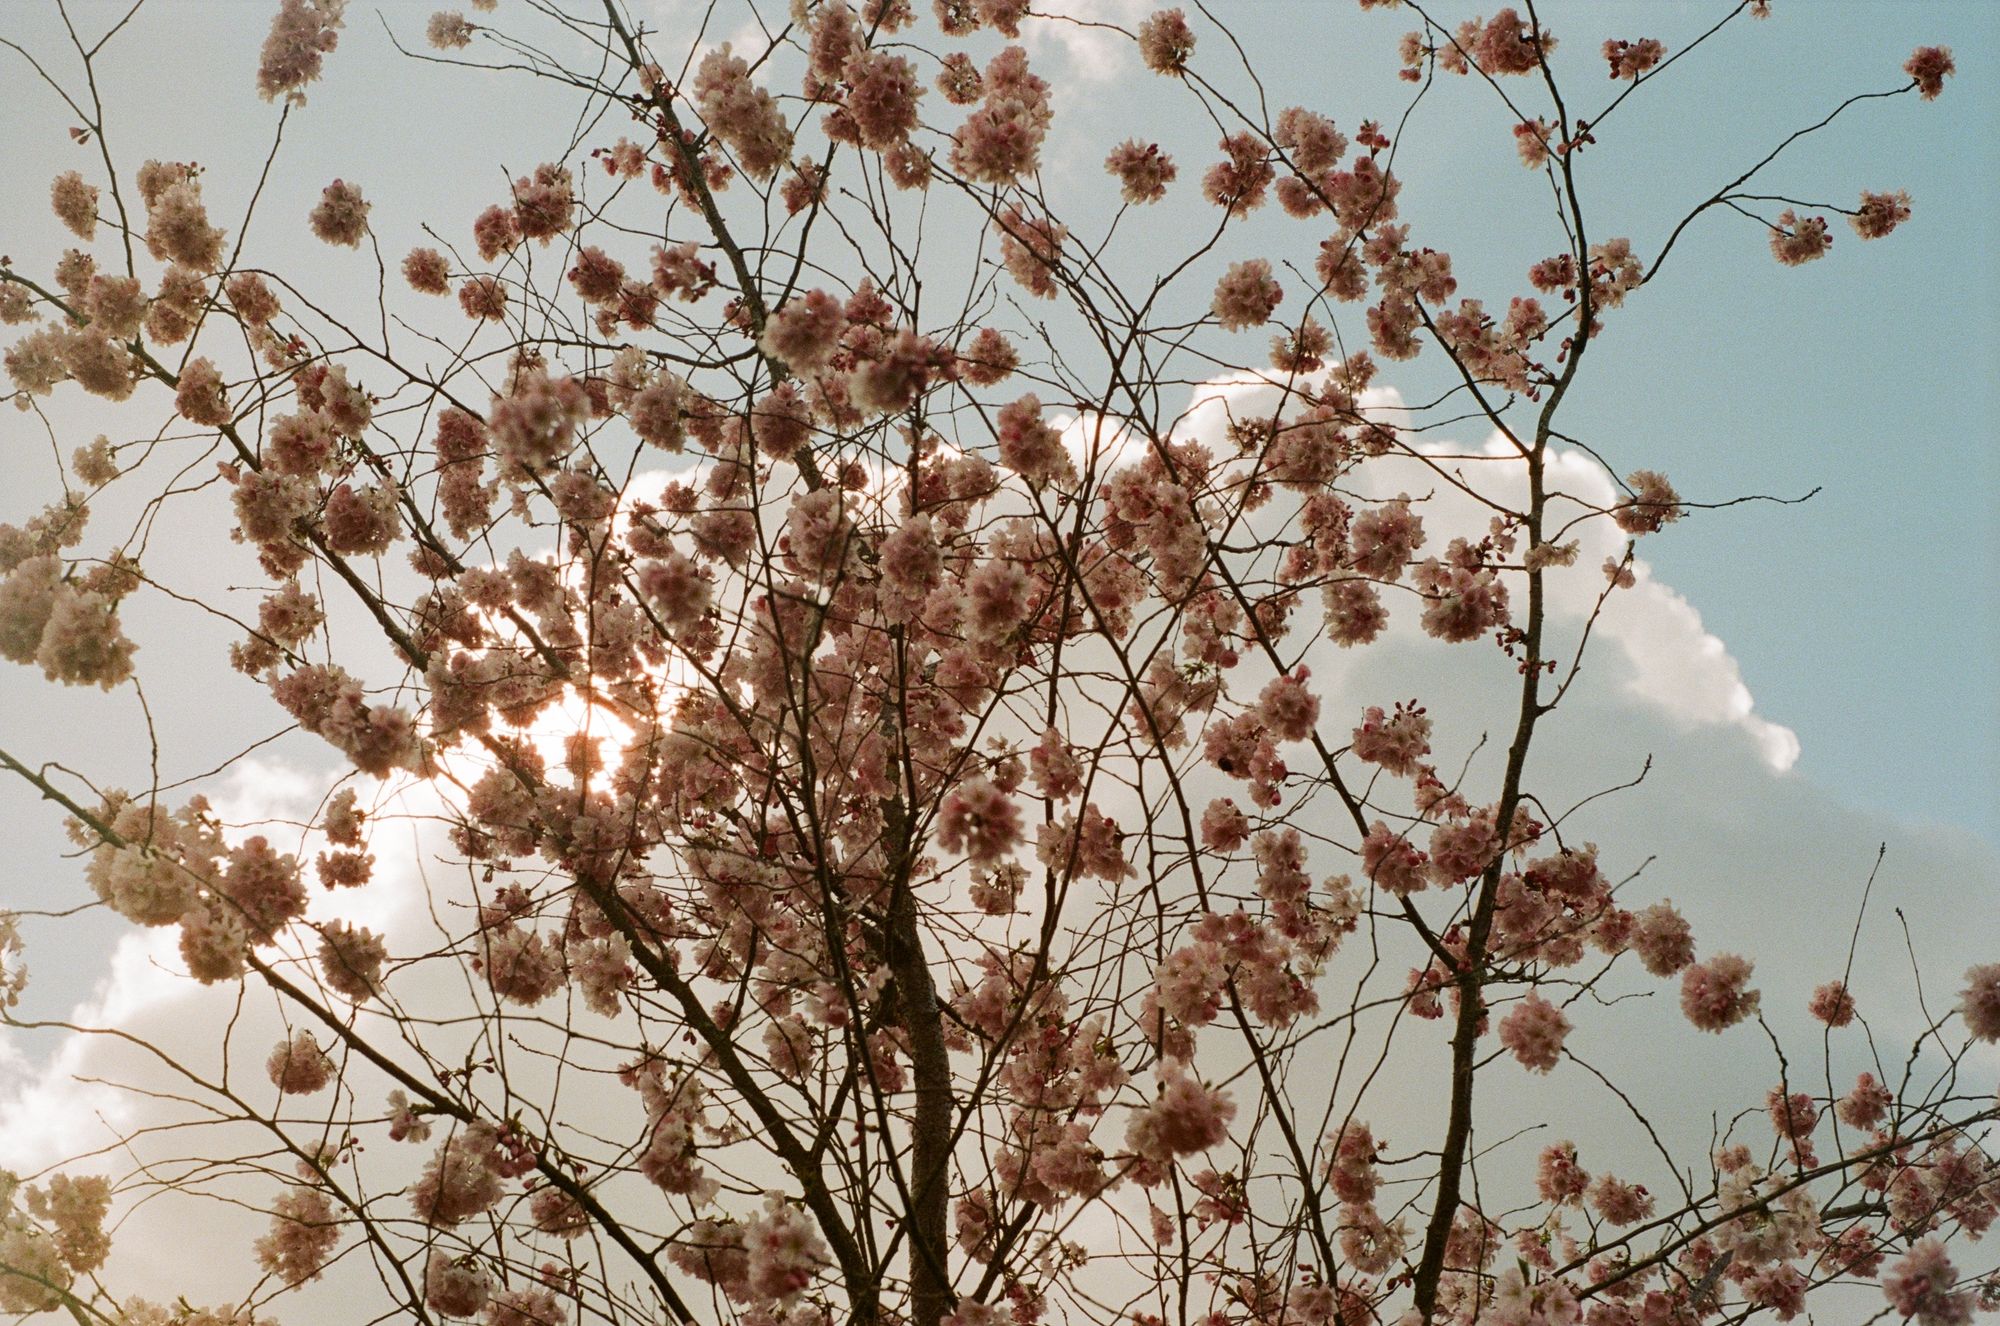 The sun emerges from behind a fluffy white cloud behind a tree whose bare branches are starting to pop with pastel-pink coloured flowers.